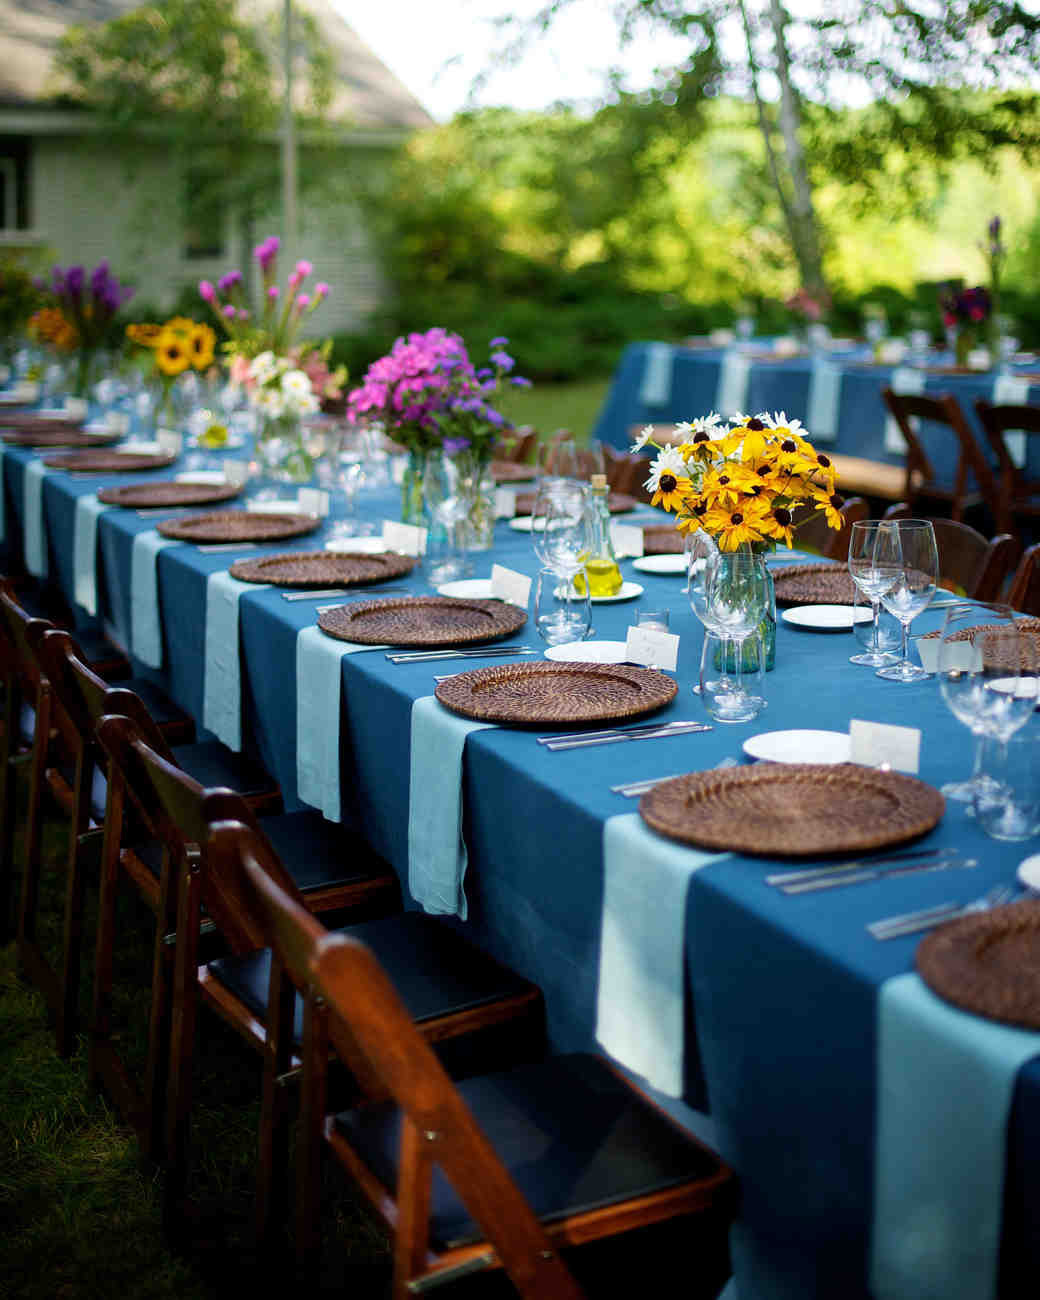 Engagement Party Ideas Outside
 How to Throw the Perfect Backyard Engagement Party